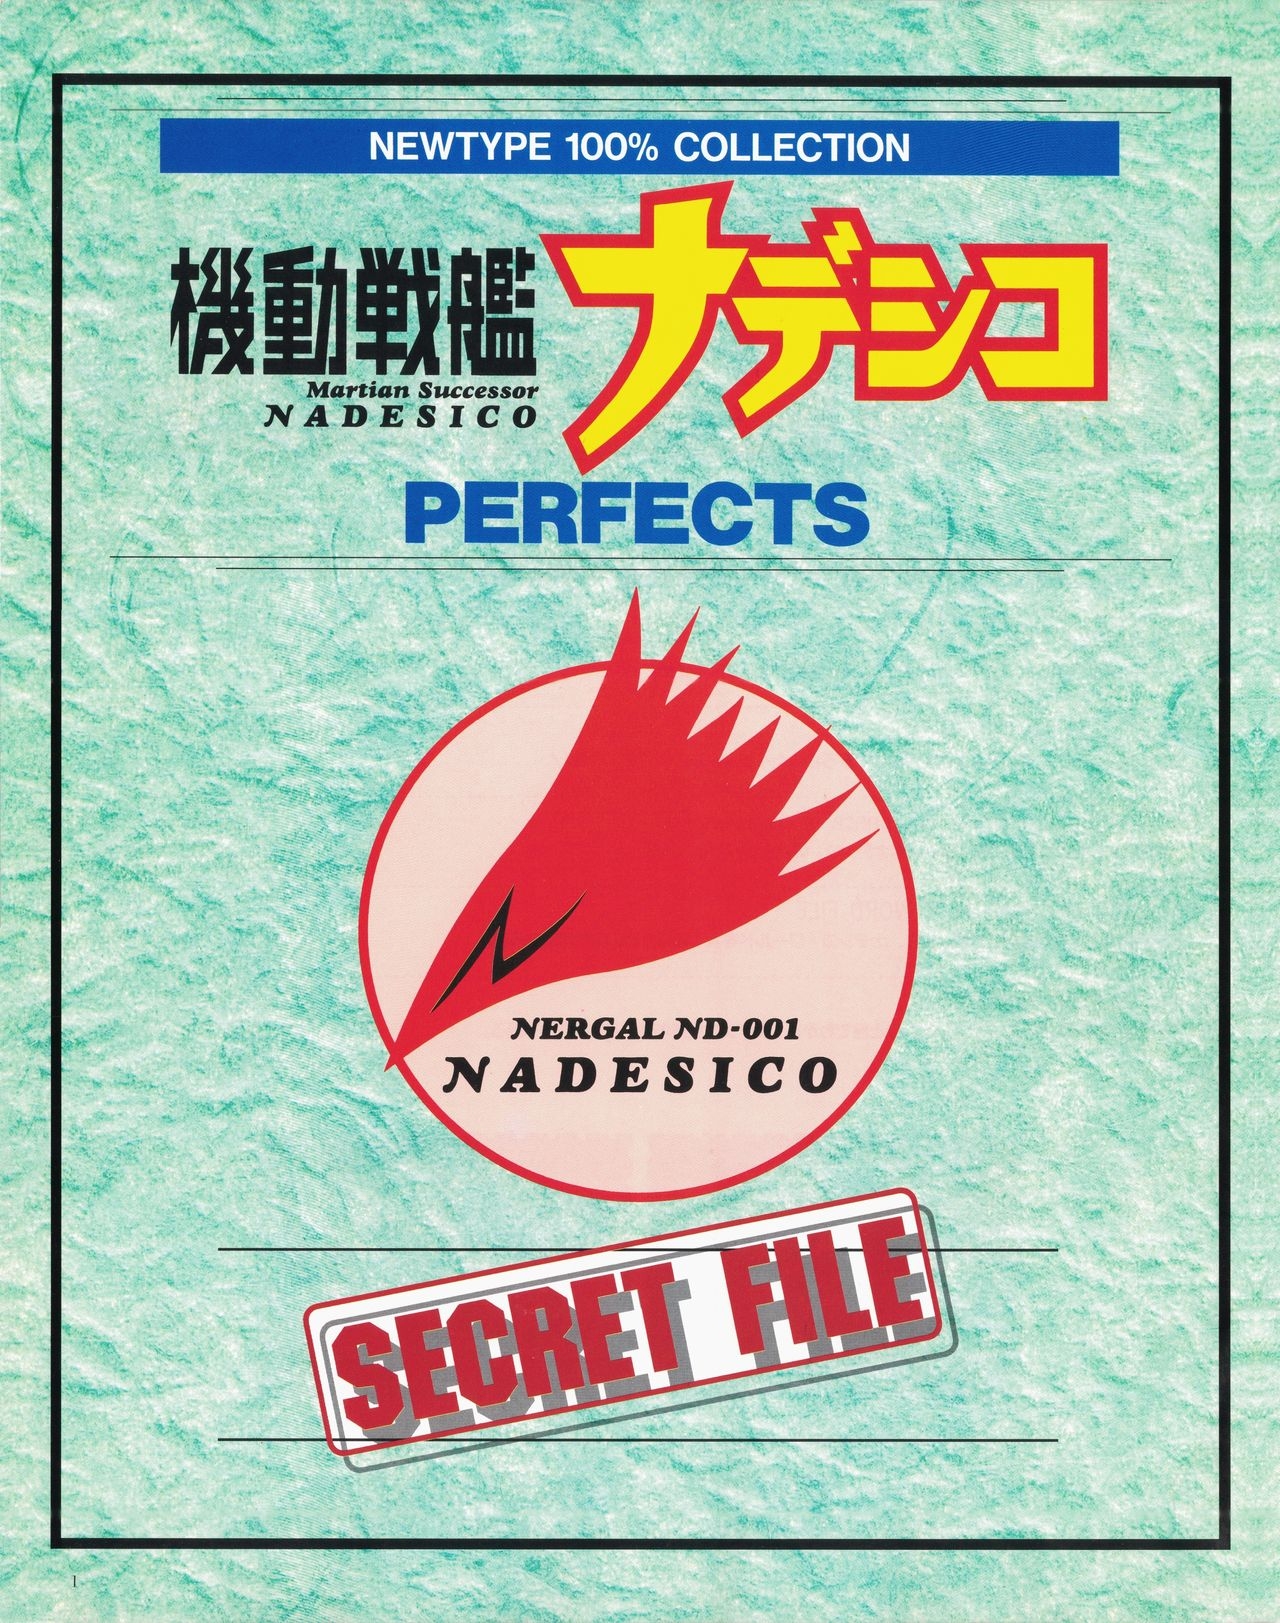 Newtype 100% Collection - Martian Successor Nadesico Perfects 3